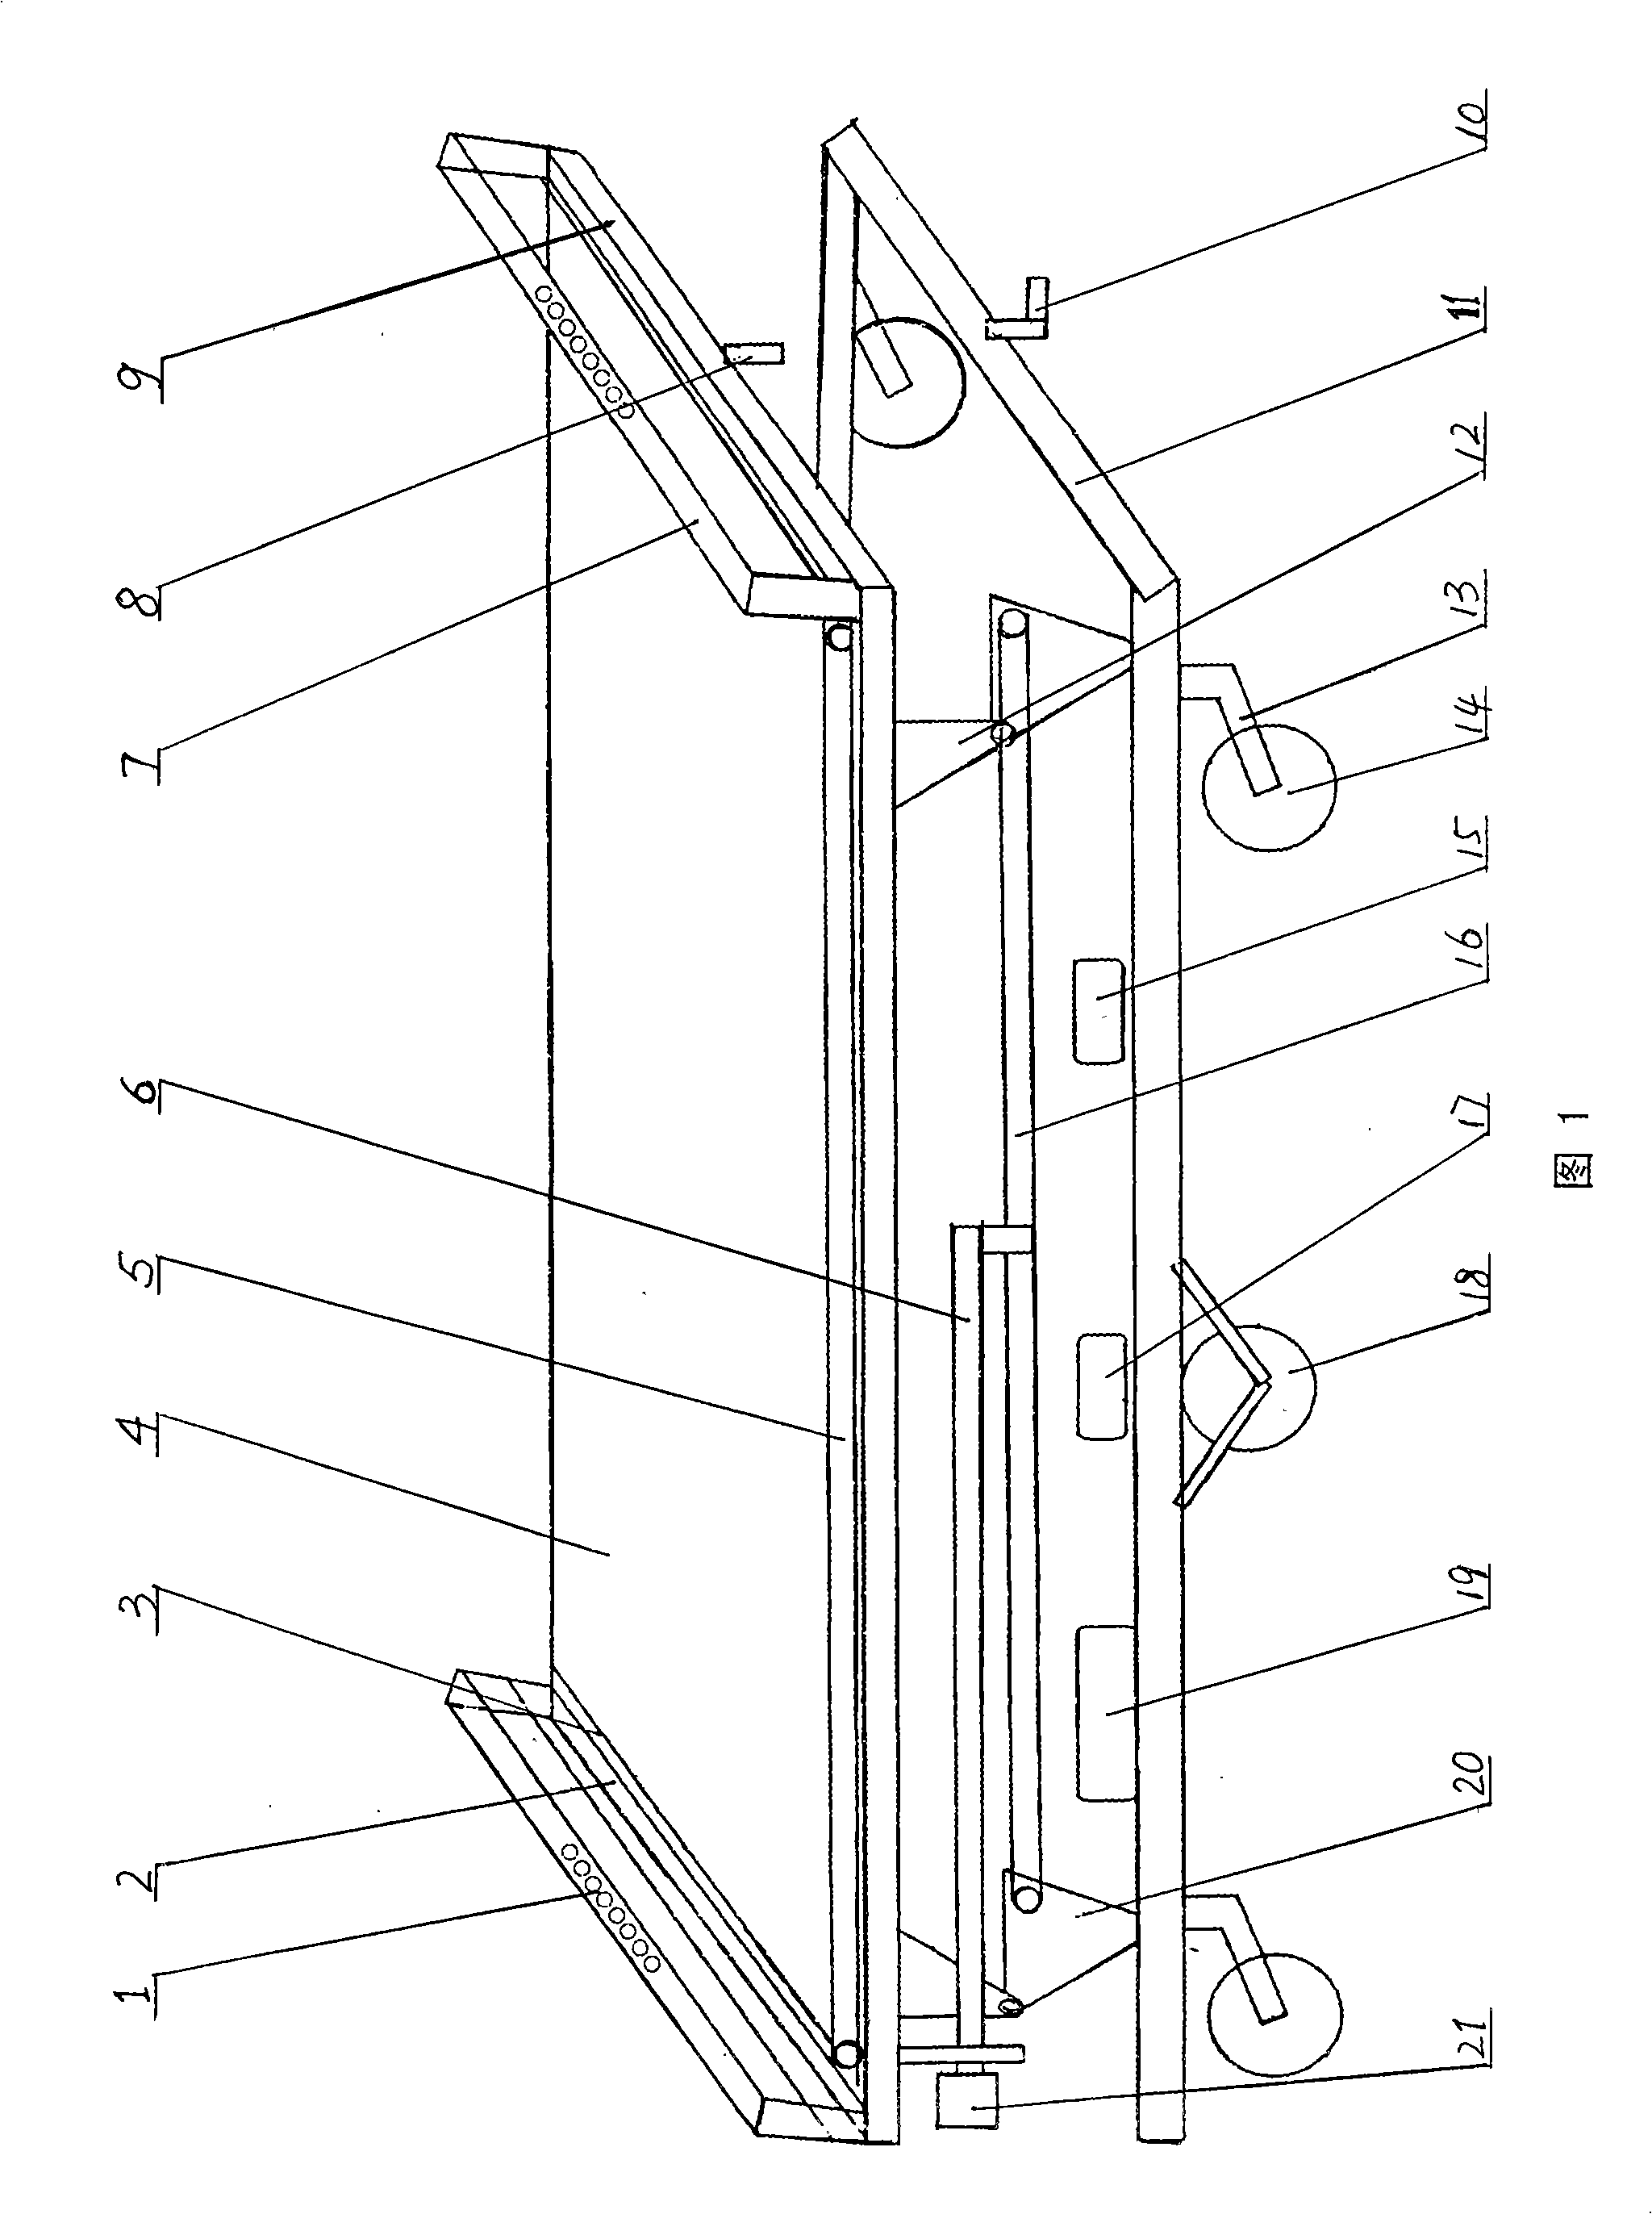 Automatic body moving vehicle for medical use